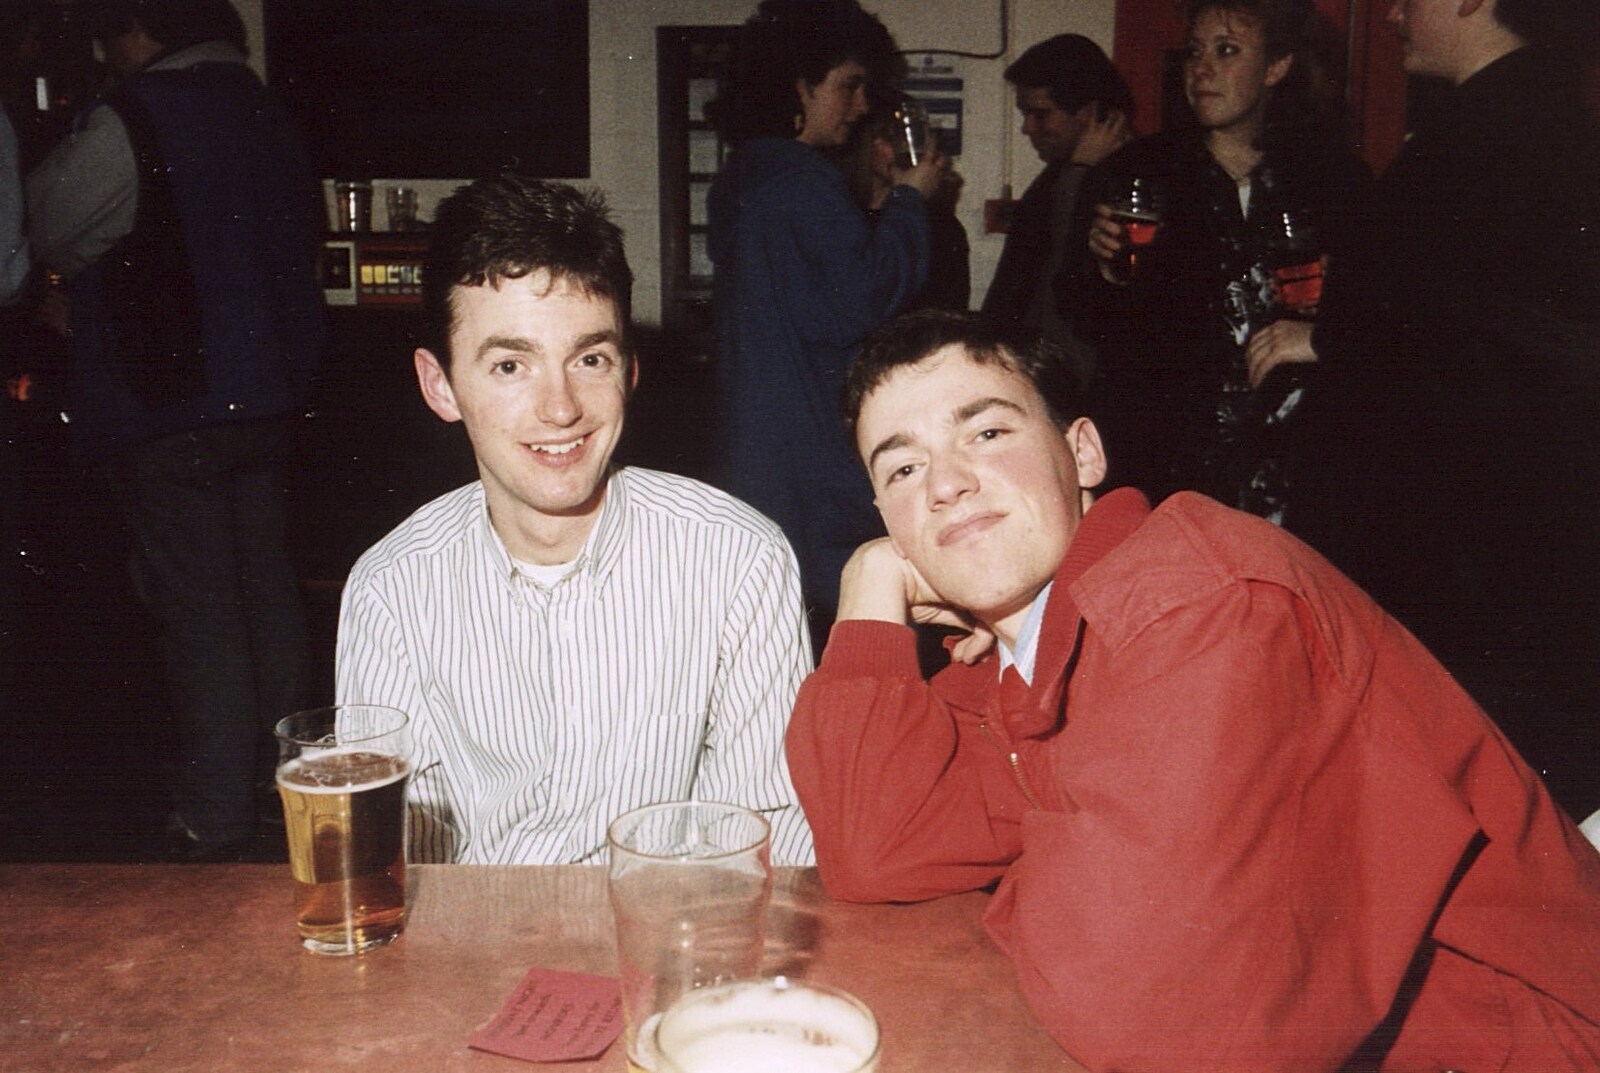 John Stuart and Dave Masterson in the bar from Uni: Graduation Day, The Guildhall, Plymouth, Devon - 30th September 1989